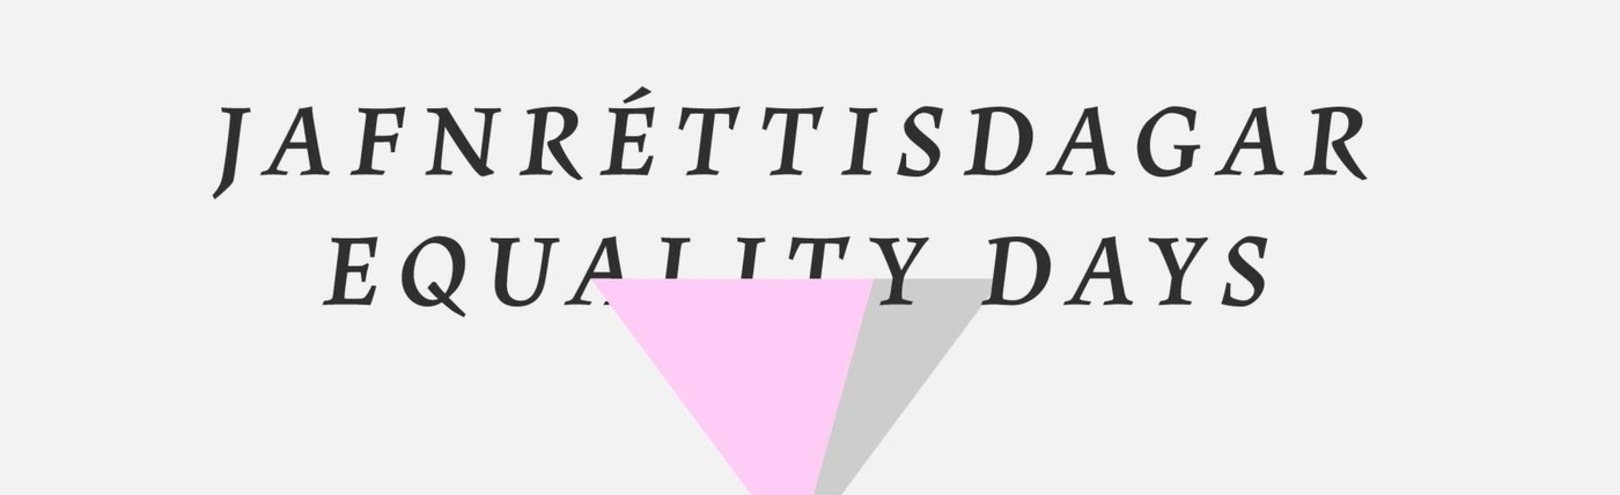 Equality Days capture equality matters form diverse angles - Available at University of Iceland